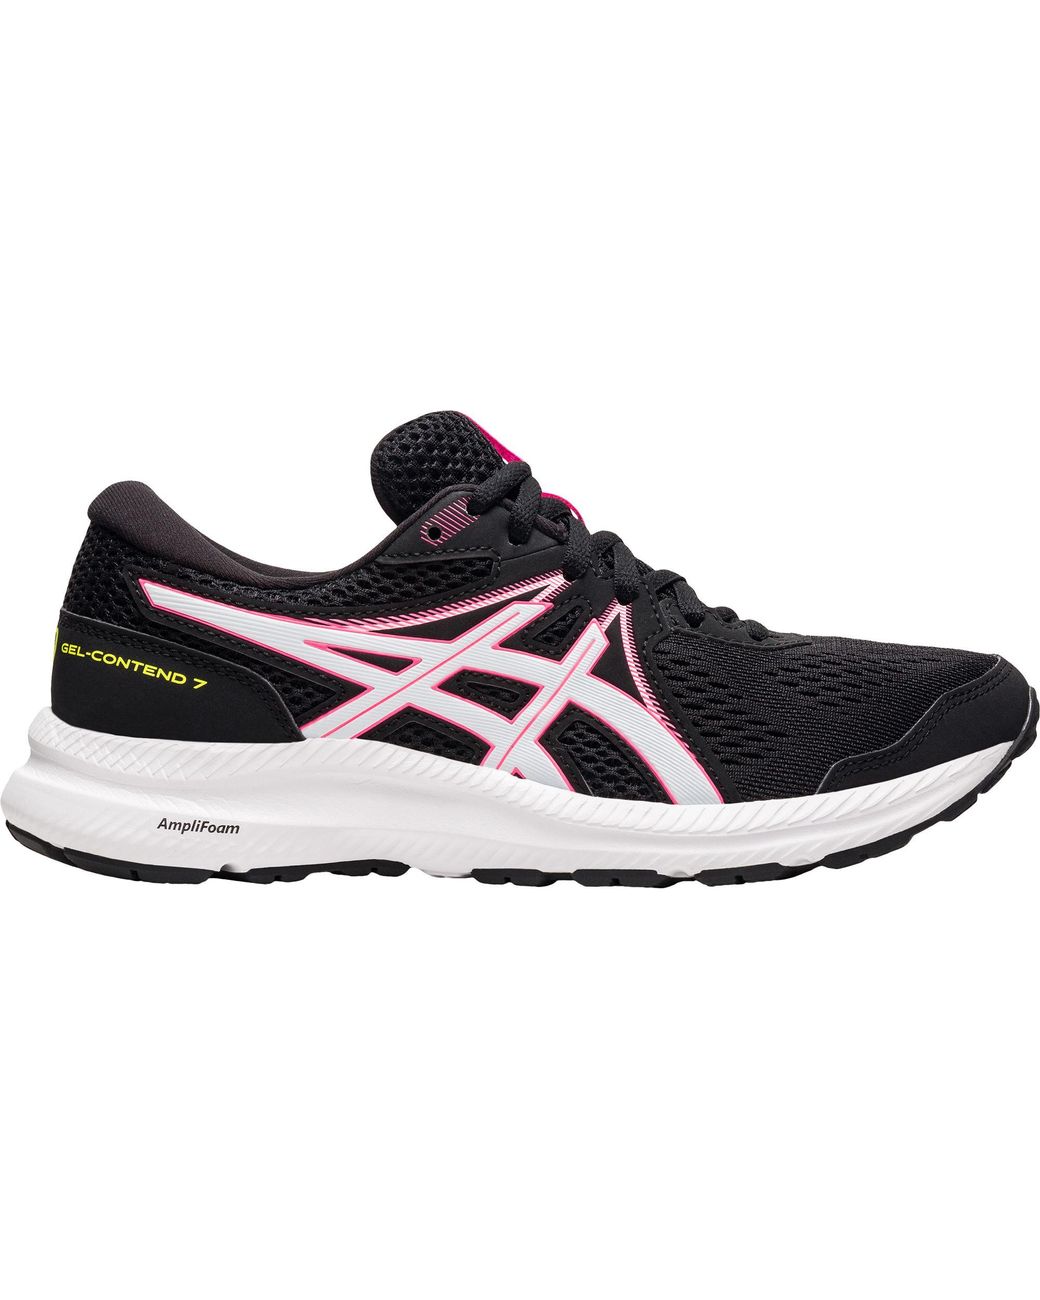 Asics Lace Gel-contend 7 Running Shoes in Black/Hot Pink (Black) - Lyst